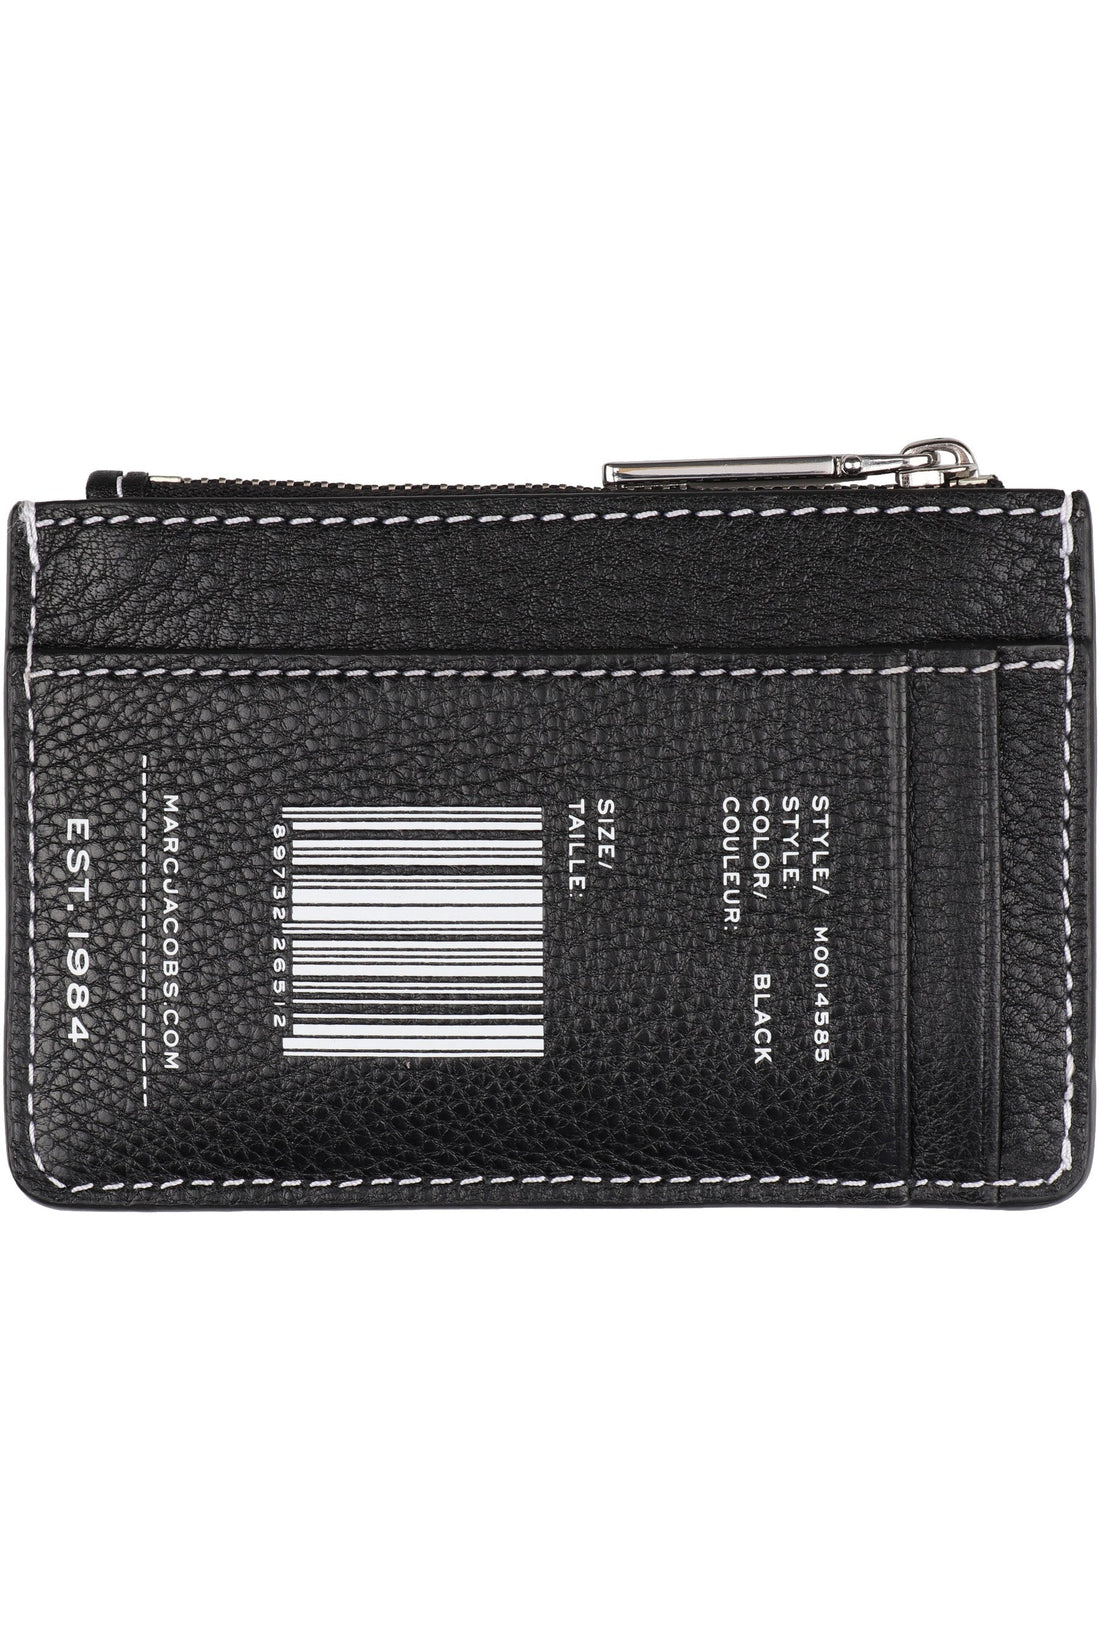 Marc Jacobs-OUTLET-SALE-Small leather wallet-ARCHIVIST